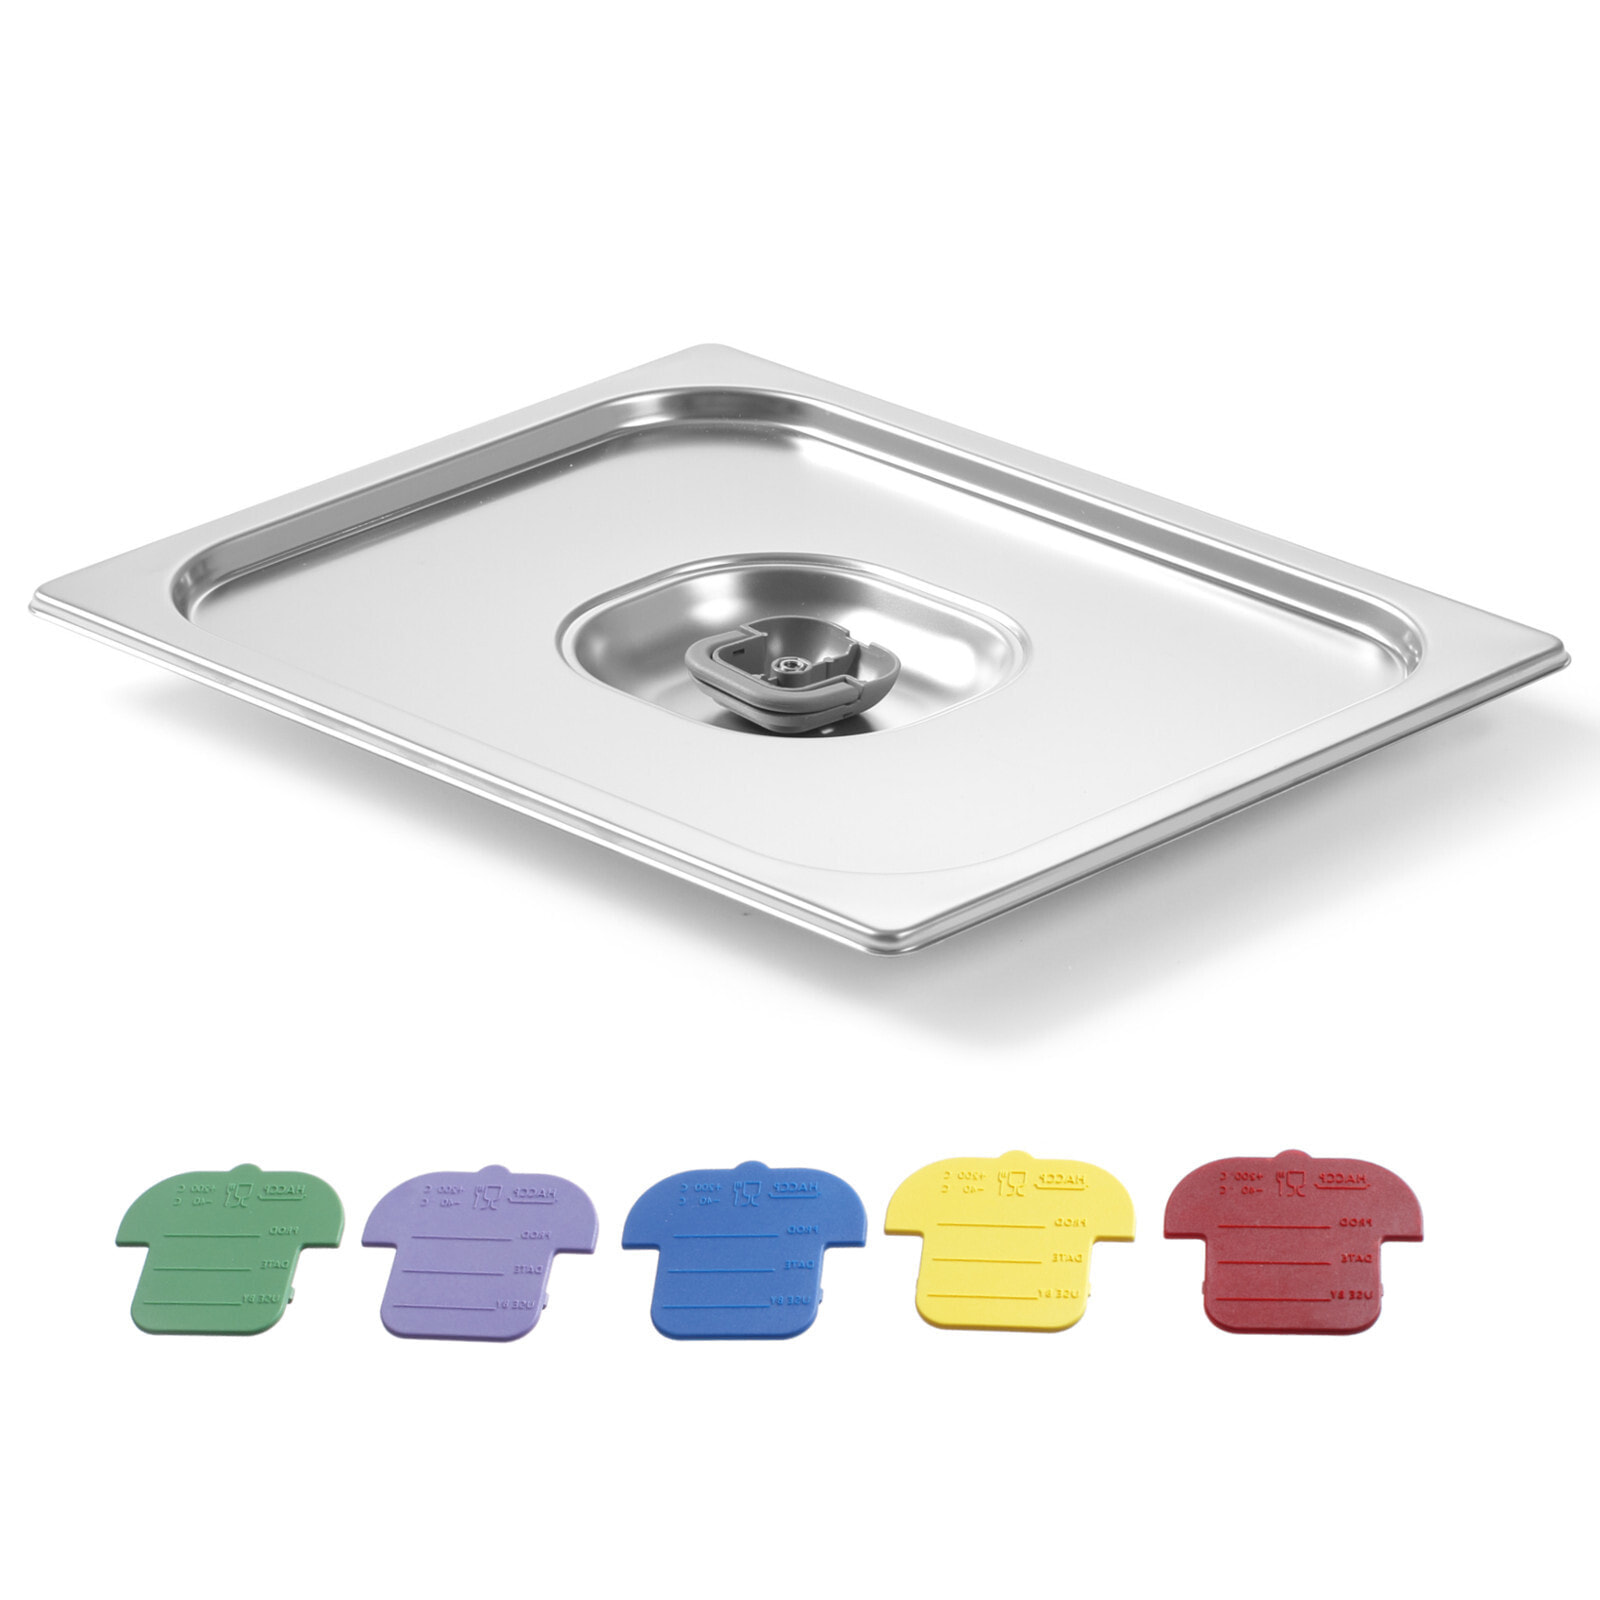 The lid for the GN container with colored clips Haccp GN2 / 4 530x162mm stainless steel - Hendi 805275